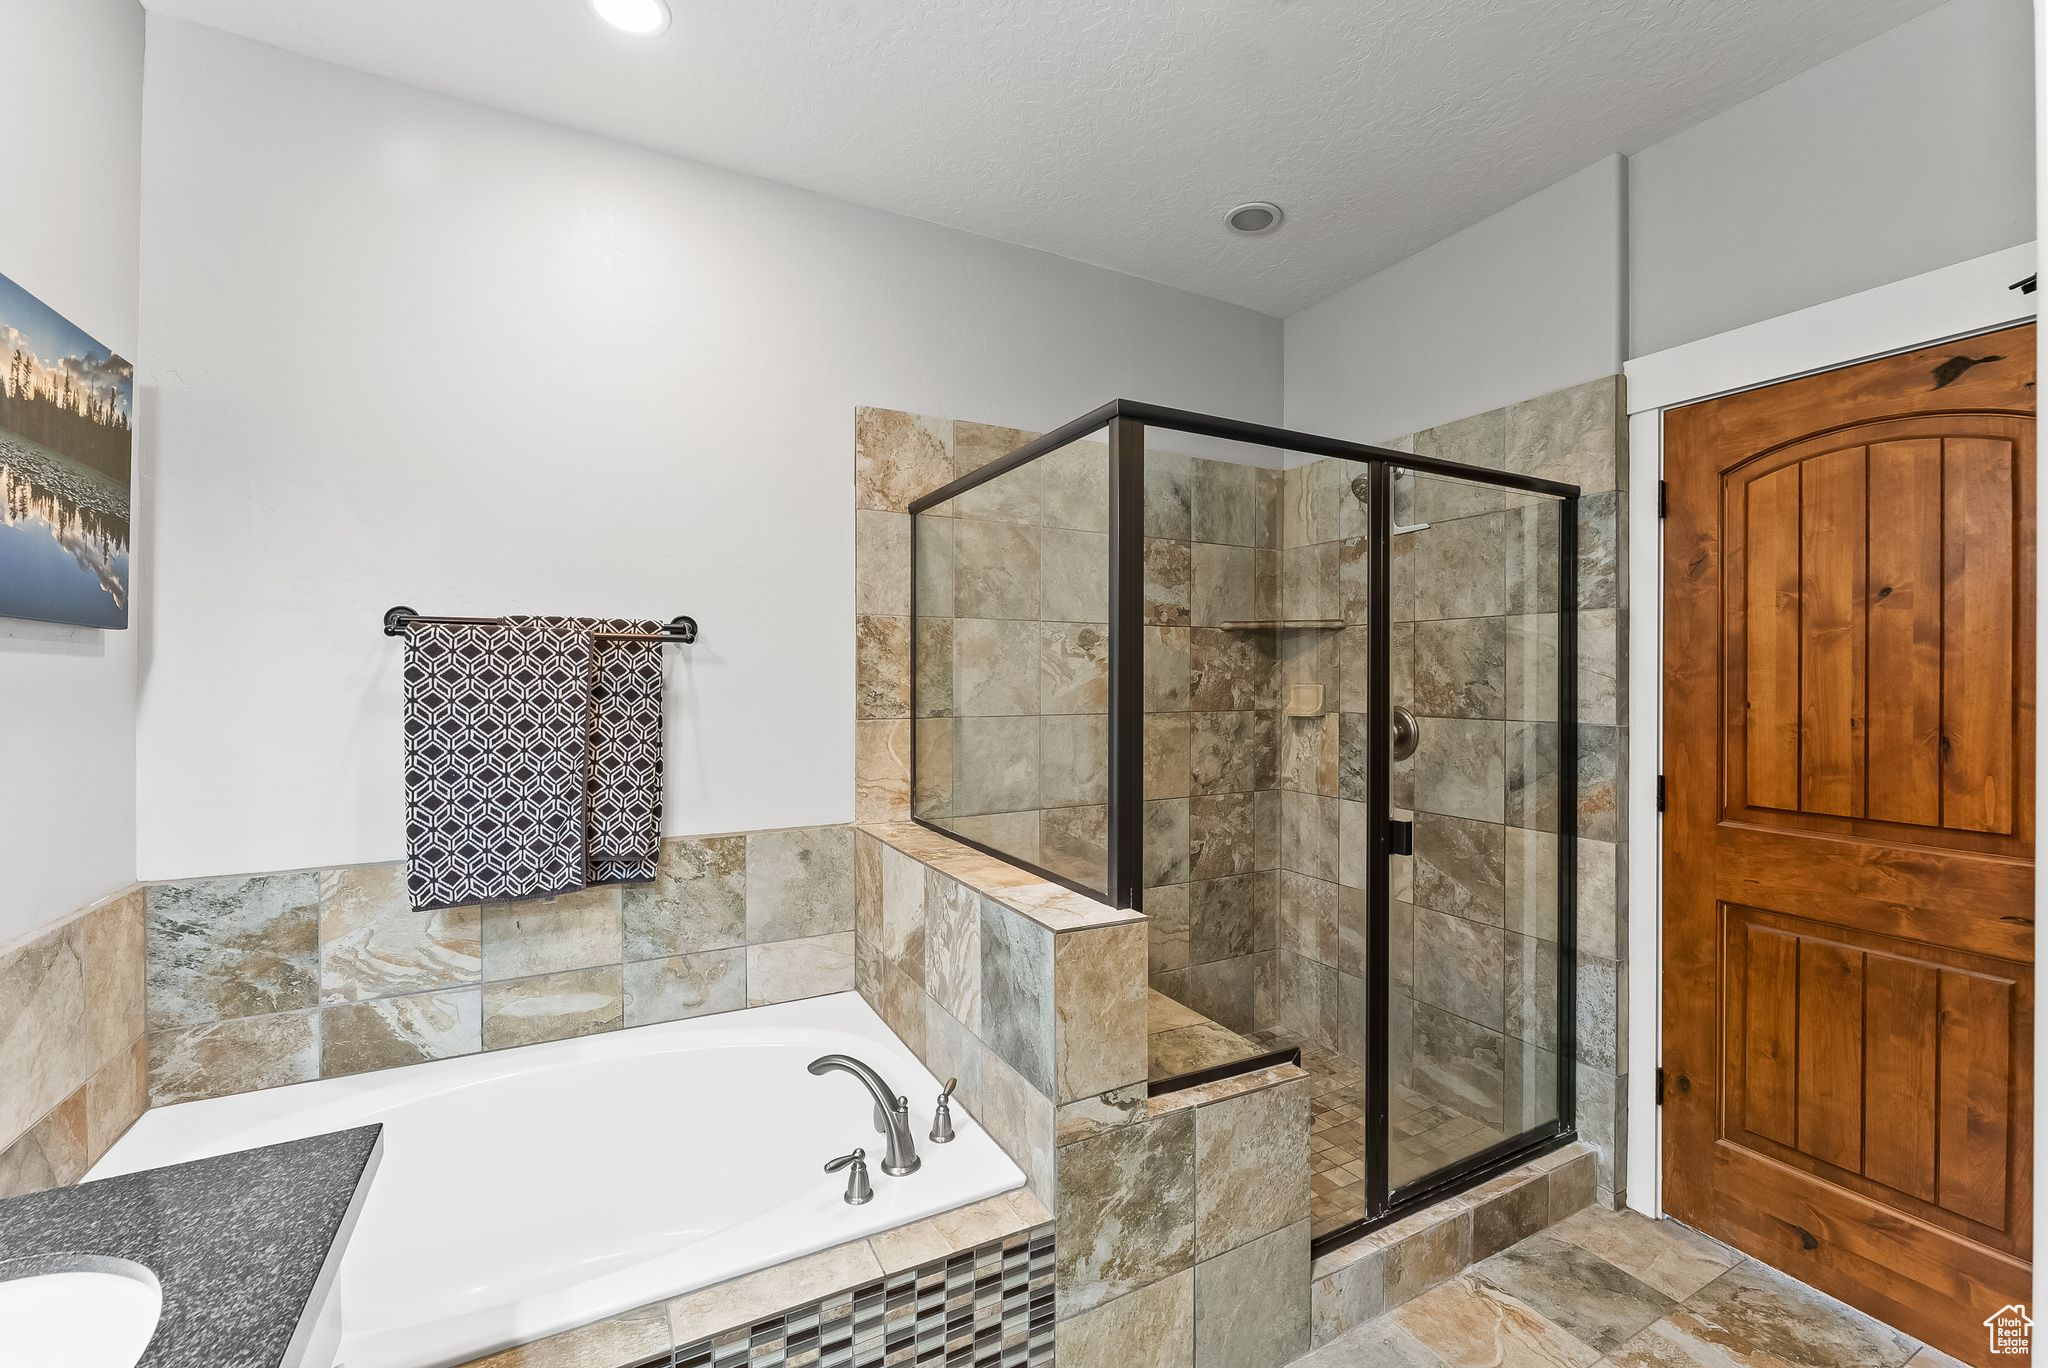 Bathroom with tile flooring, vanity, a textured ceiling, and separate shower and tub